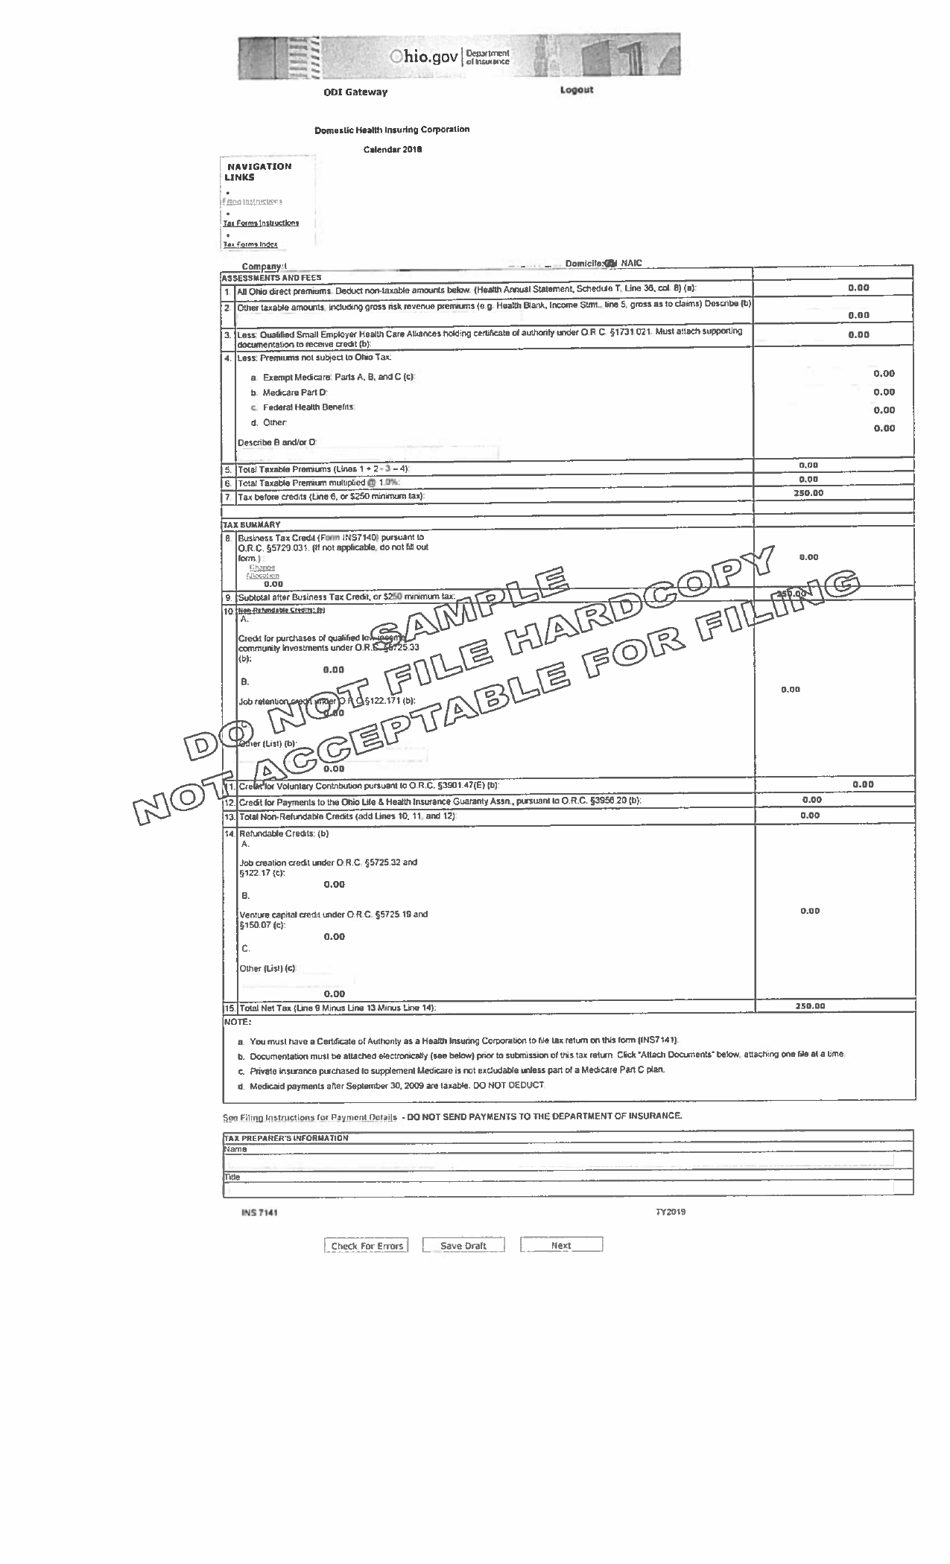 Sample Form INS7141 Domestic Health Insuring Corporation - Ohio, Page 1